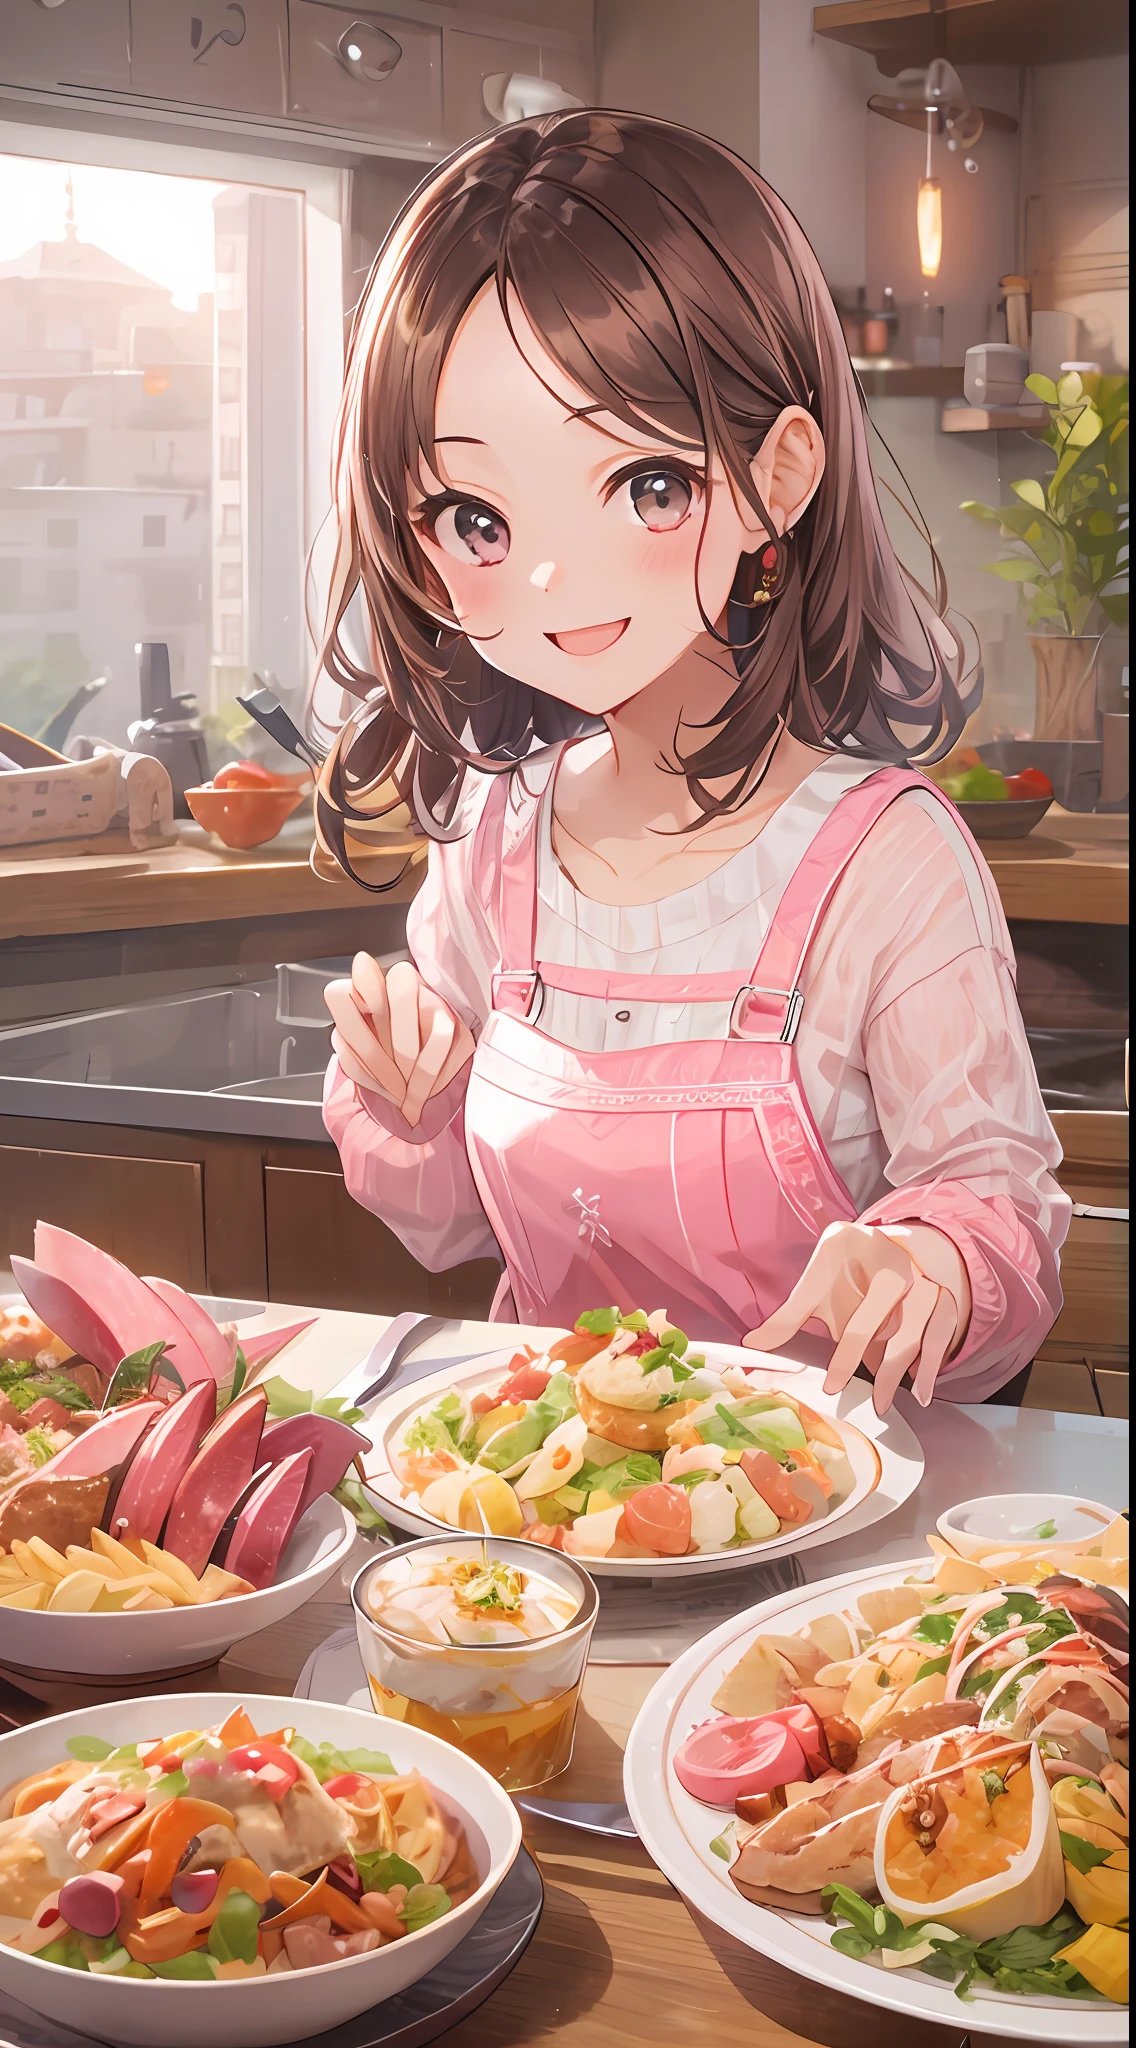 The image of a cute girl who likes pink, appearance々Eat a feast of dishes, With a smile and posing for the camera, With cute gestures.